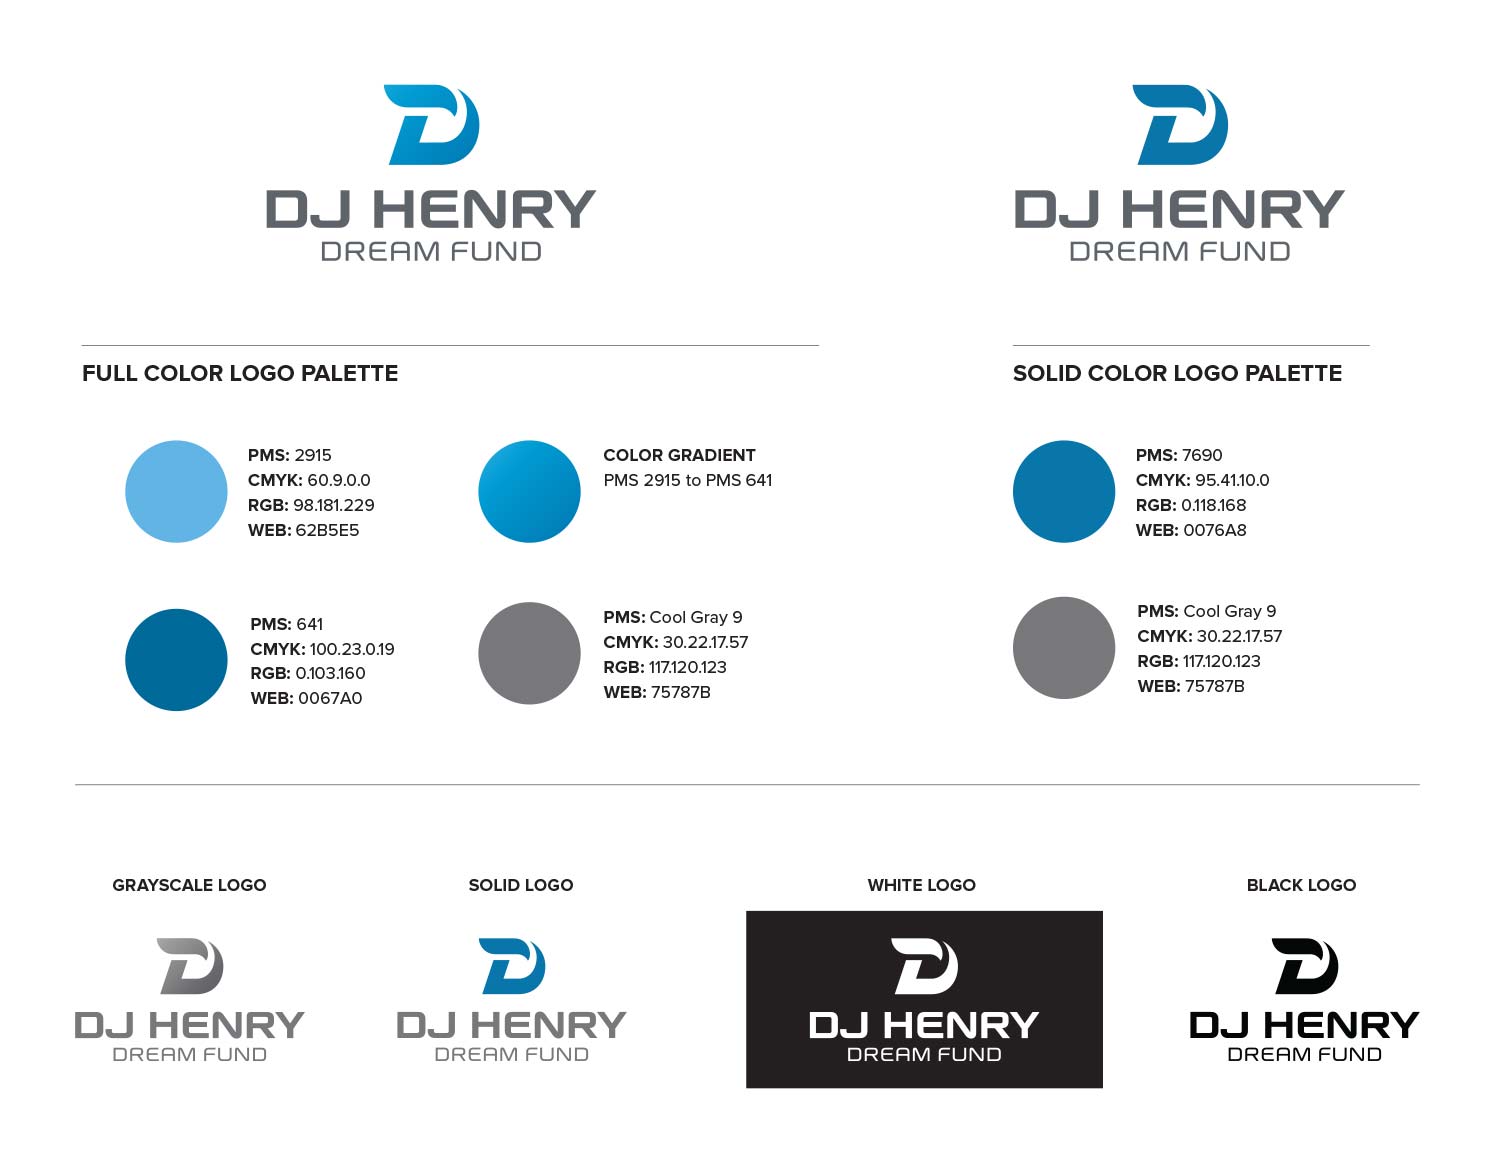 DJ Henry Dream Fund logo style sheet including logos and color usage